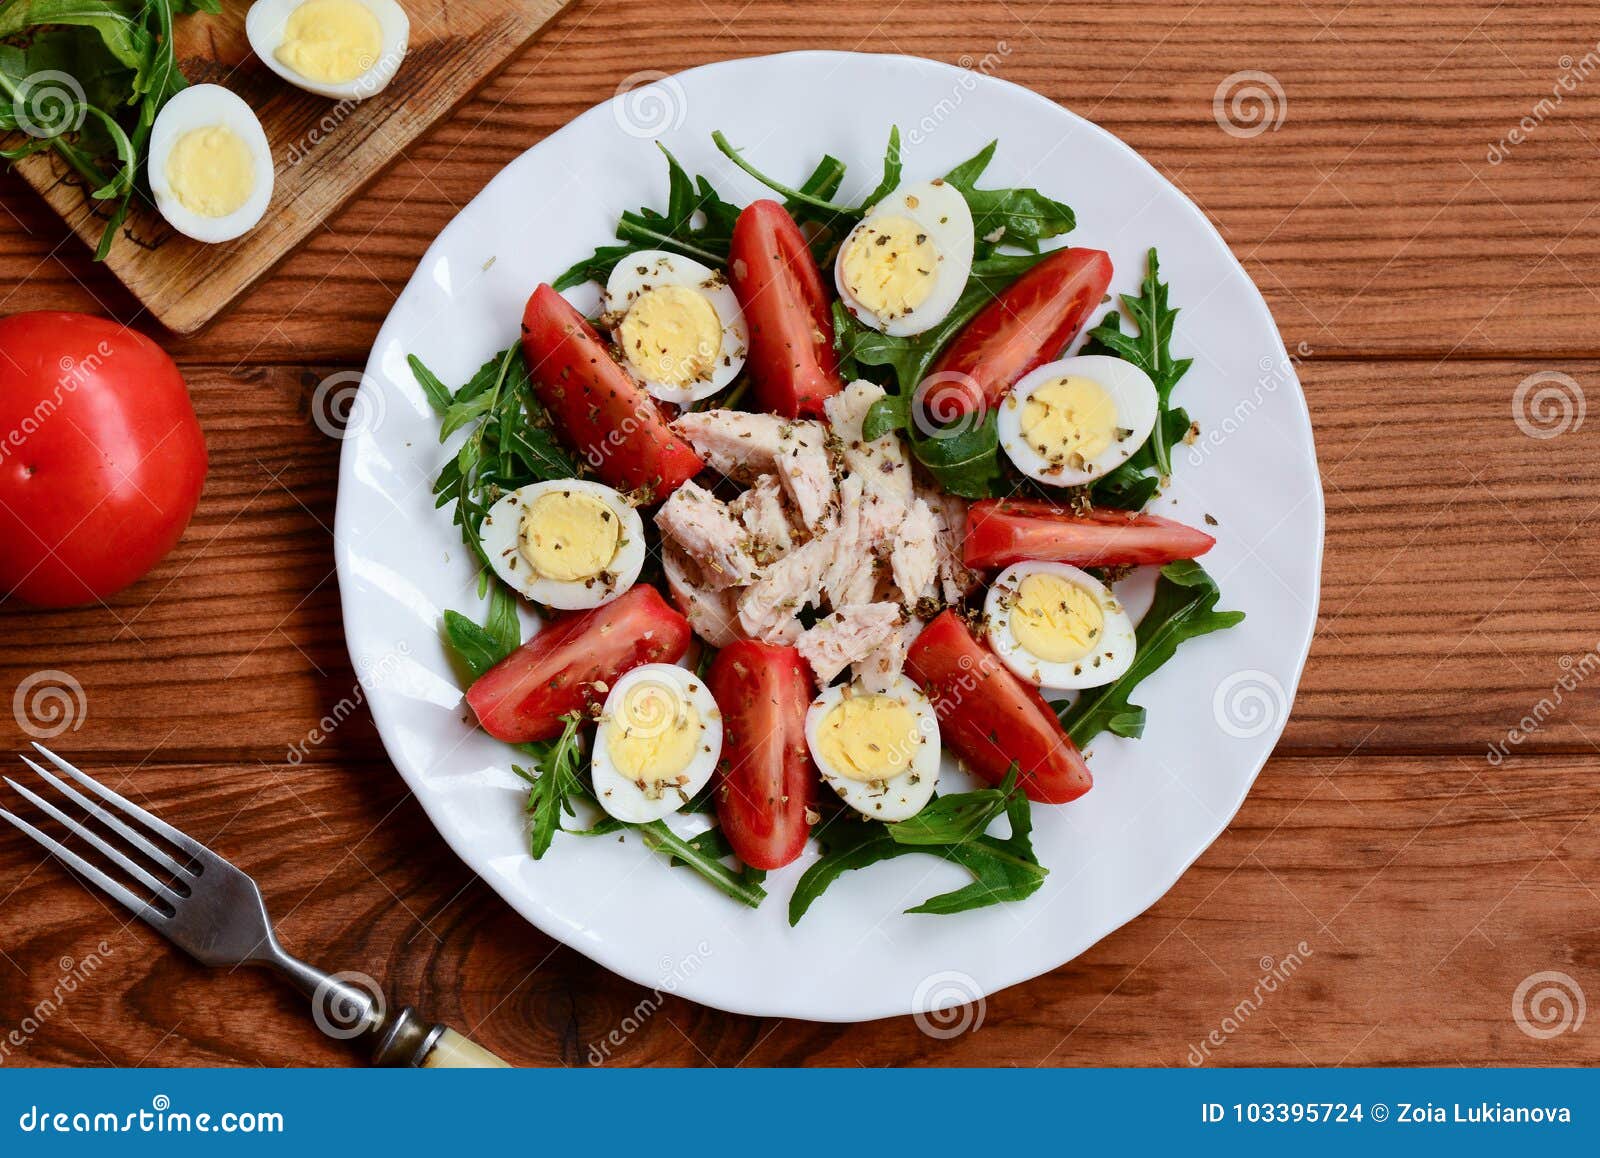 Healthy Chicken Vegetable Salad Homemade Salad With Fresh Tomatoes Arugula Quail Eggs Boiled Chicken Breast And Spices Stock Photo Image Of Dietary Arugula 103395724